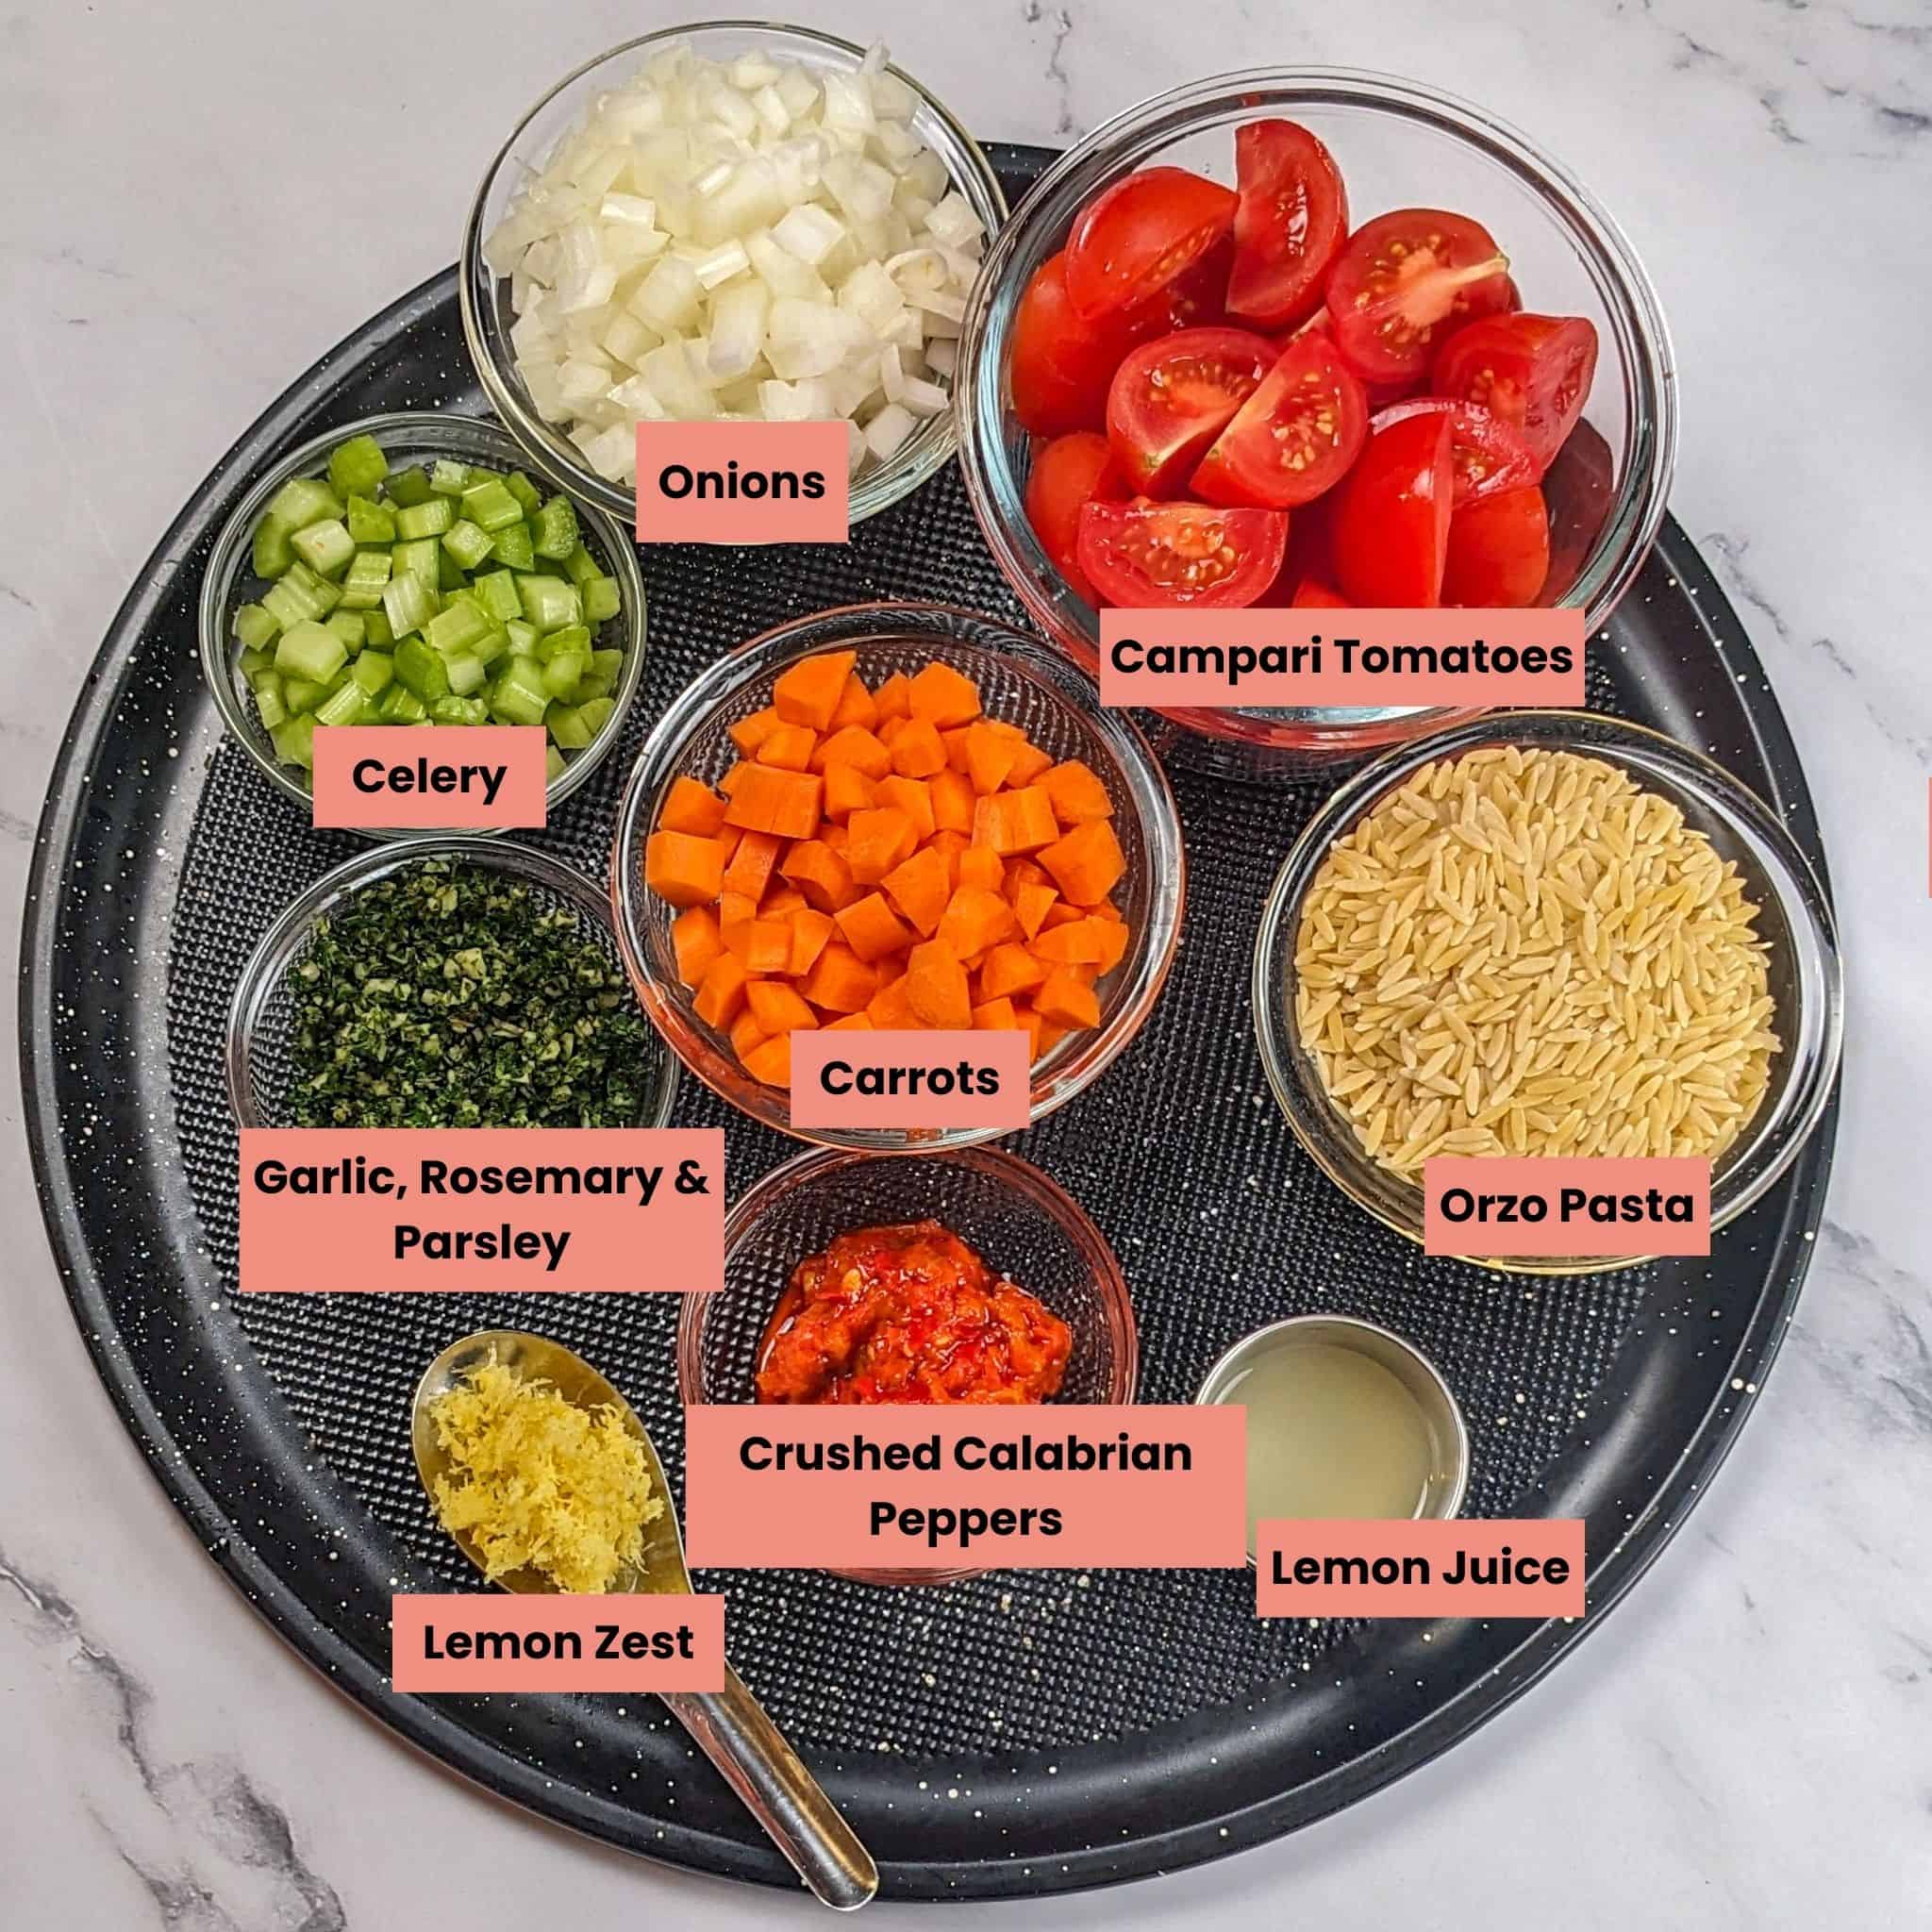 ingredients for the Easy Spicy Lemon Calabrian Chili Chicken Orzo Soup in glass containers on a large round pizza pan.